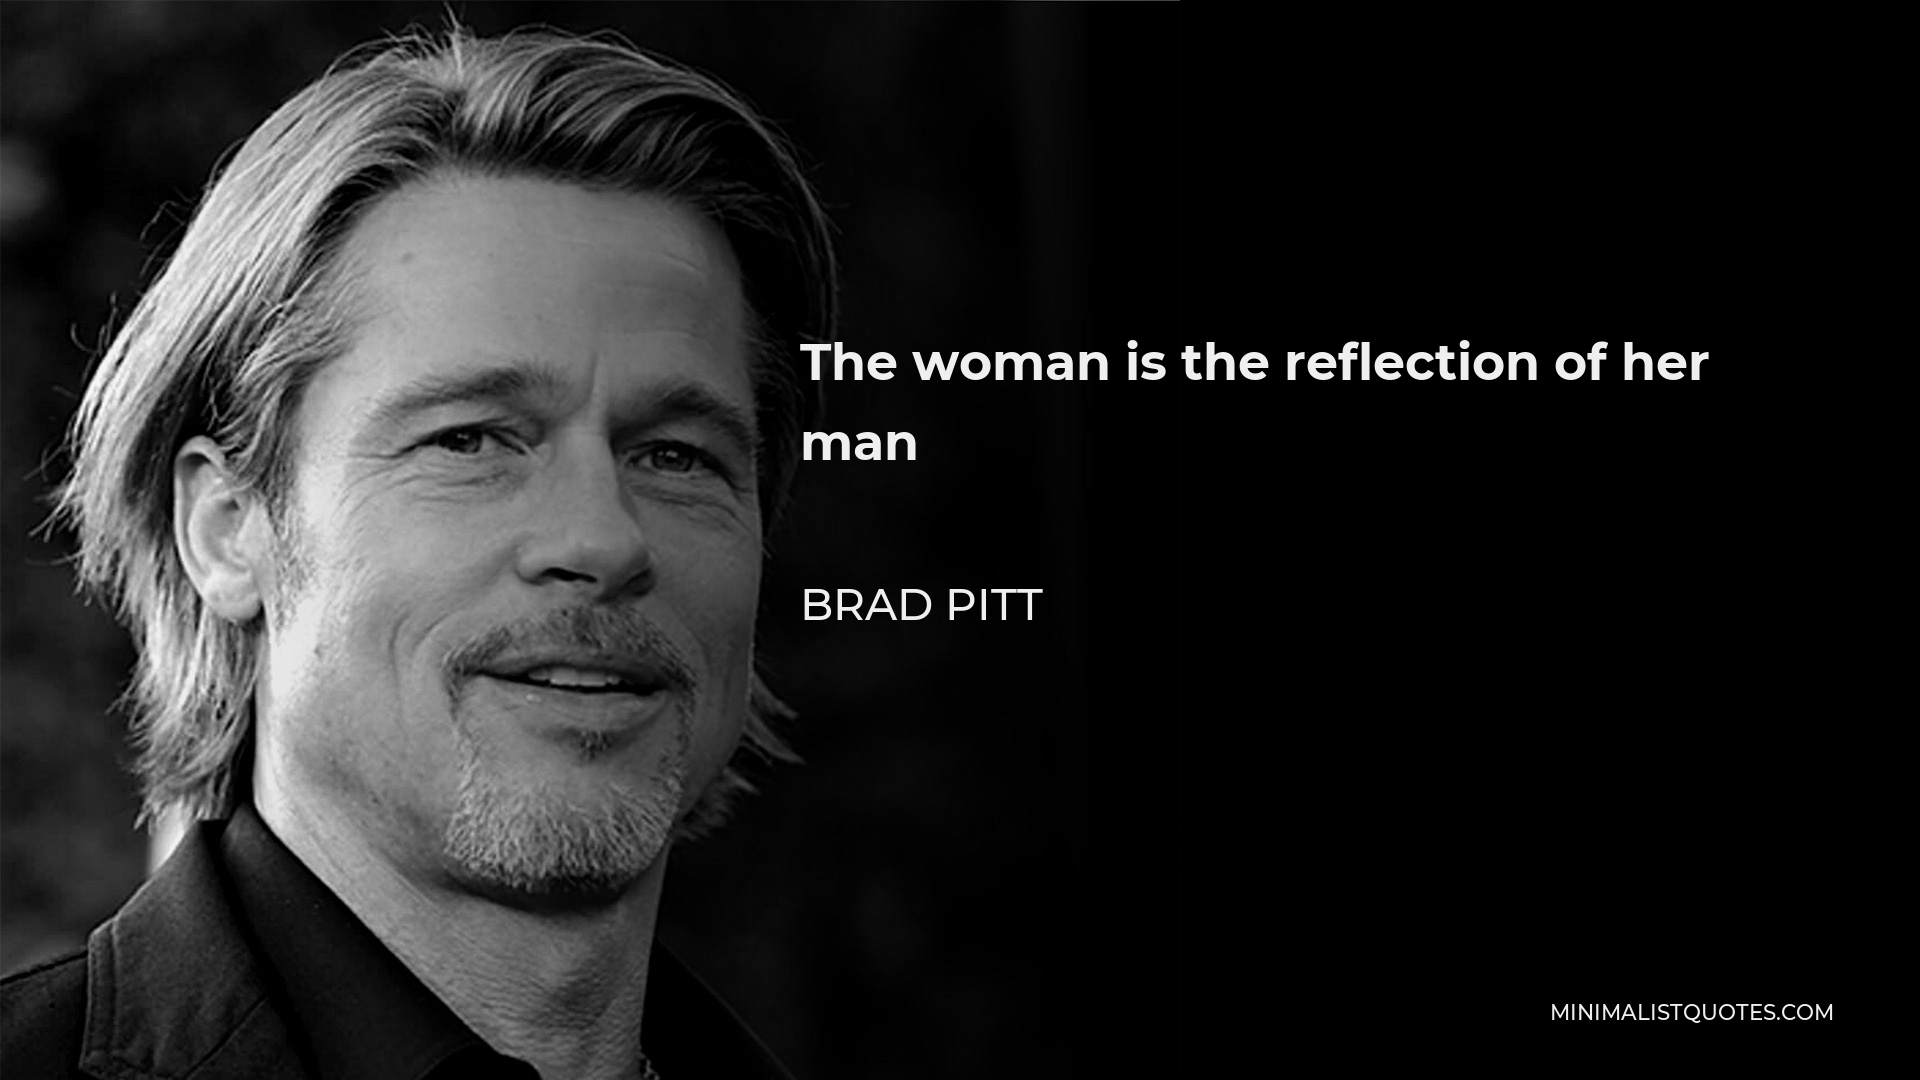 Brad Pitt Quote - The woman is the reflection of her man